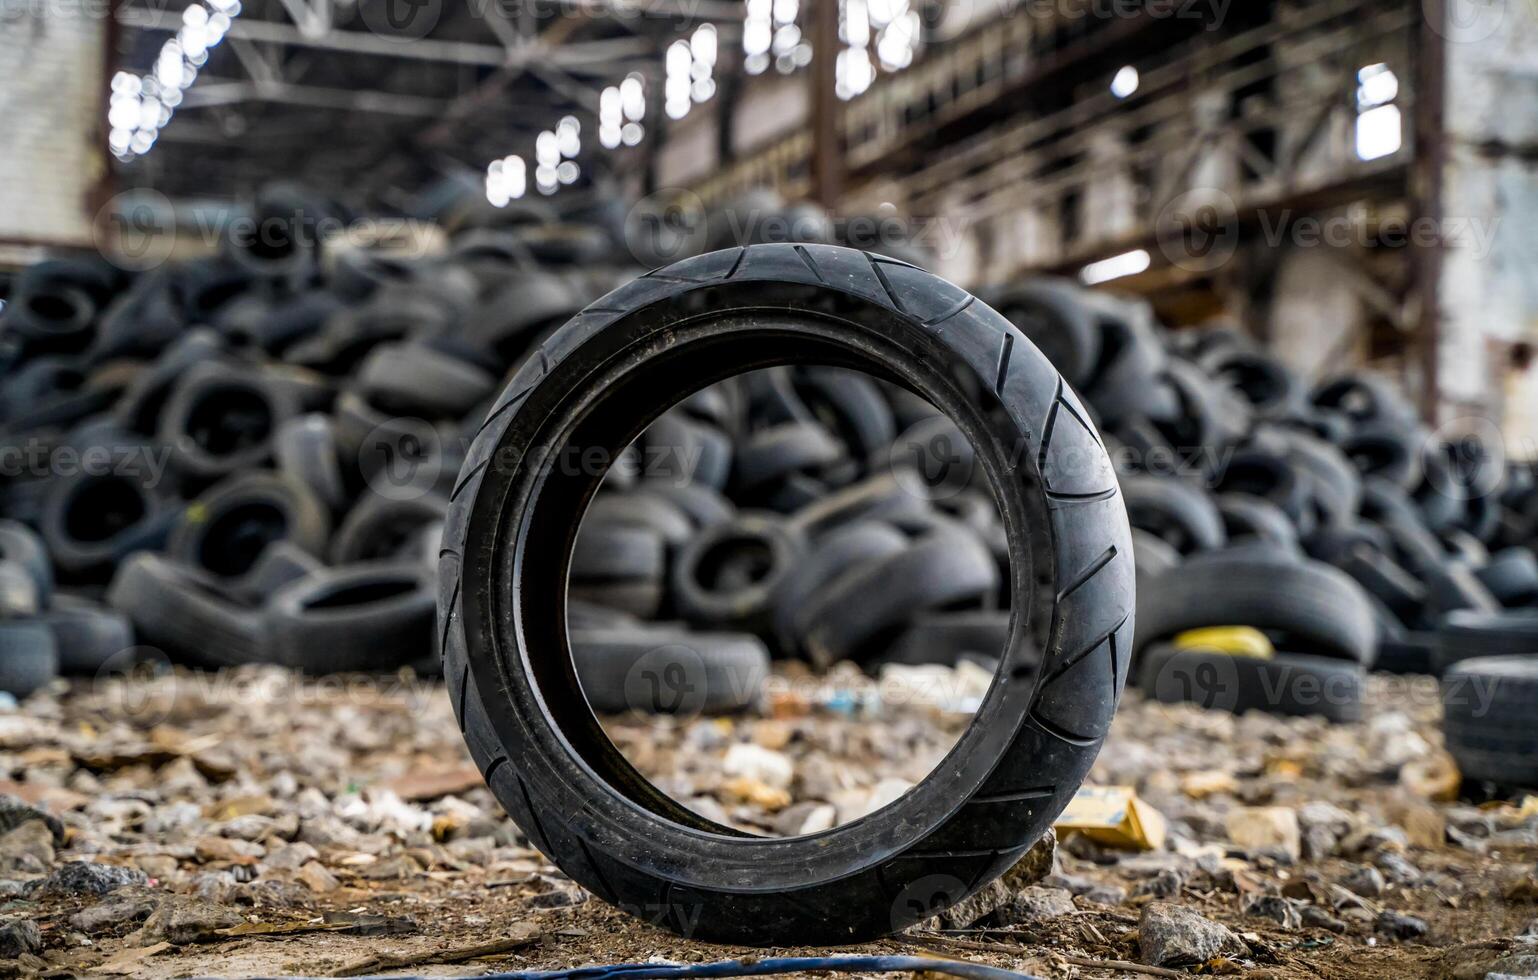 Dirty old tire is on the ground standing next to the other used tyres in the damaged plant. Rubber junk from the car. Close-up photo